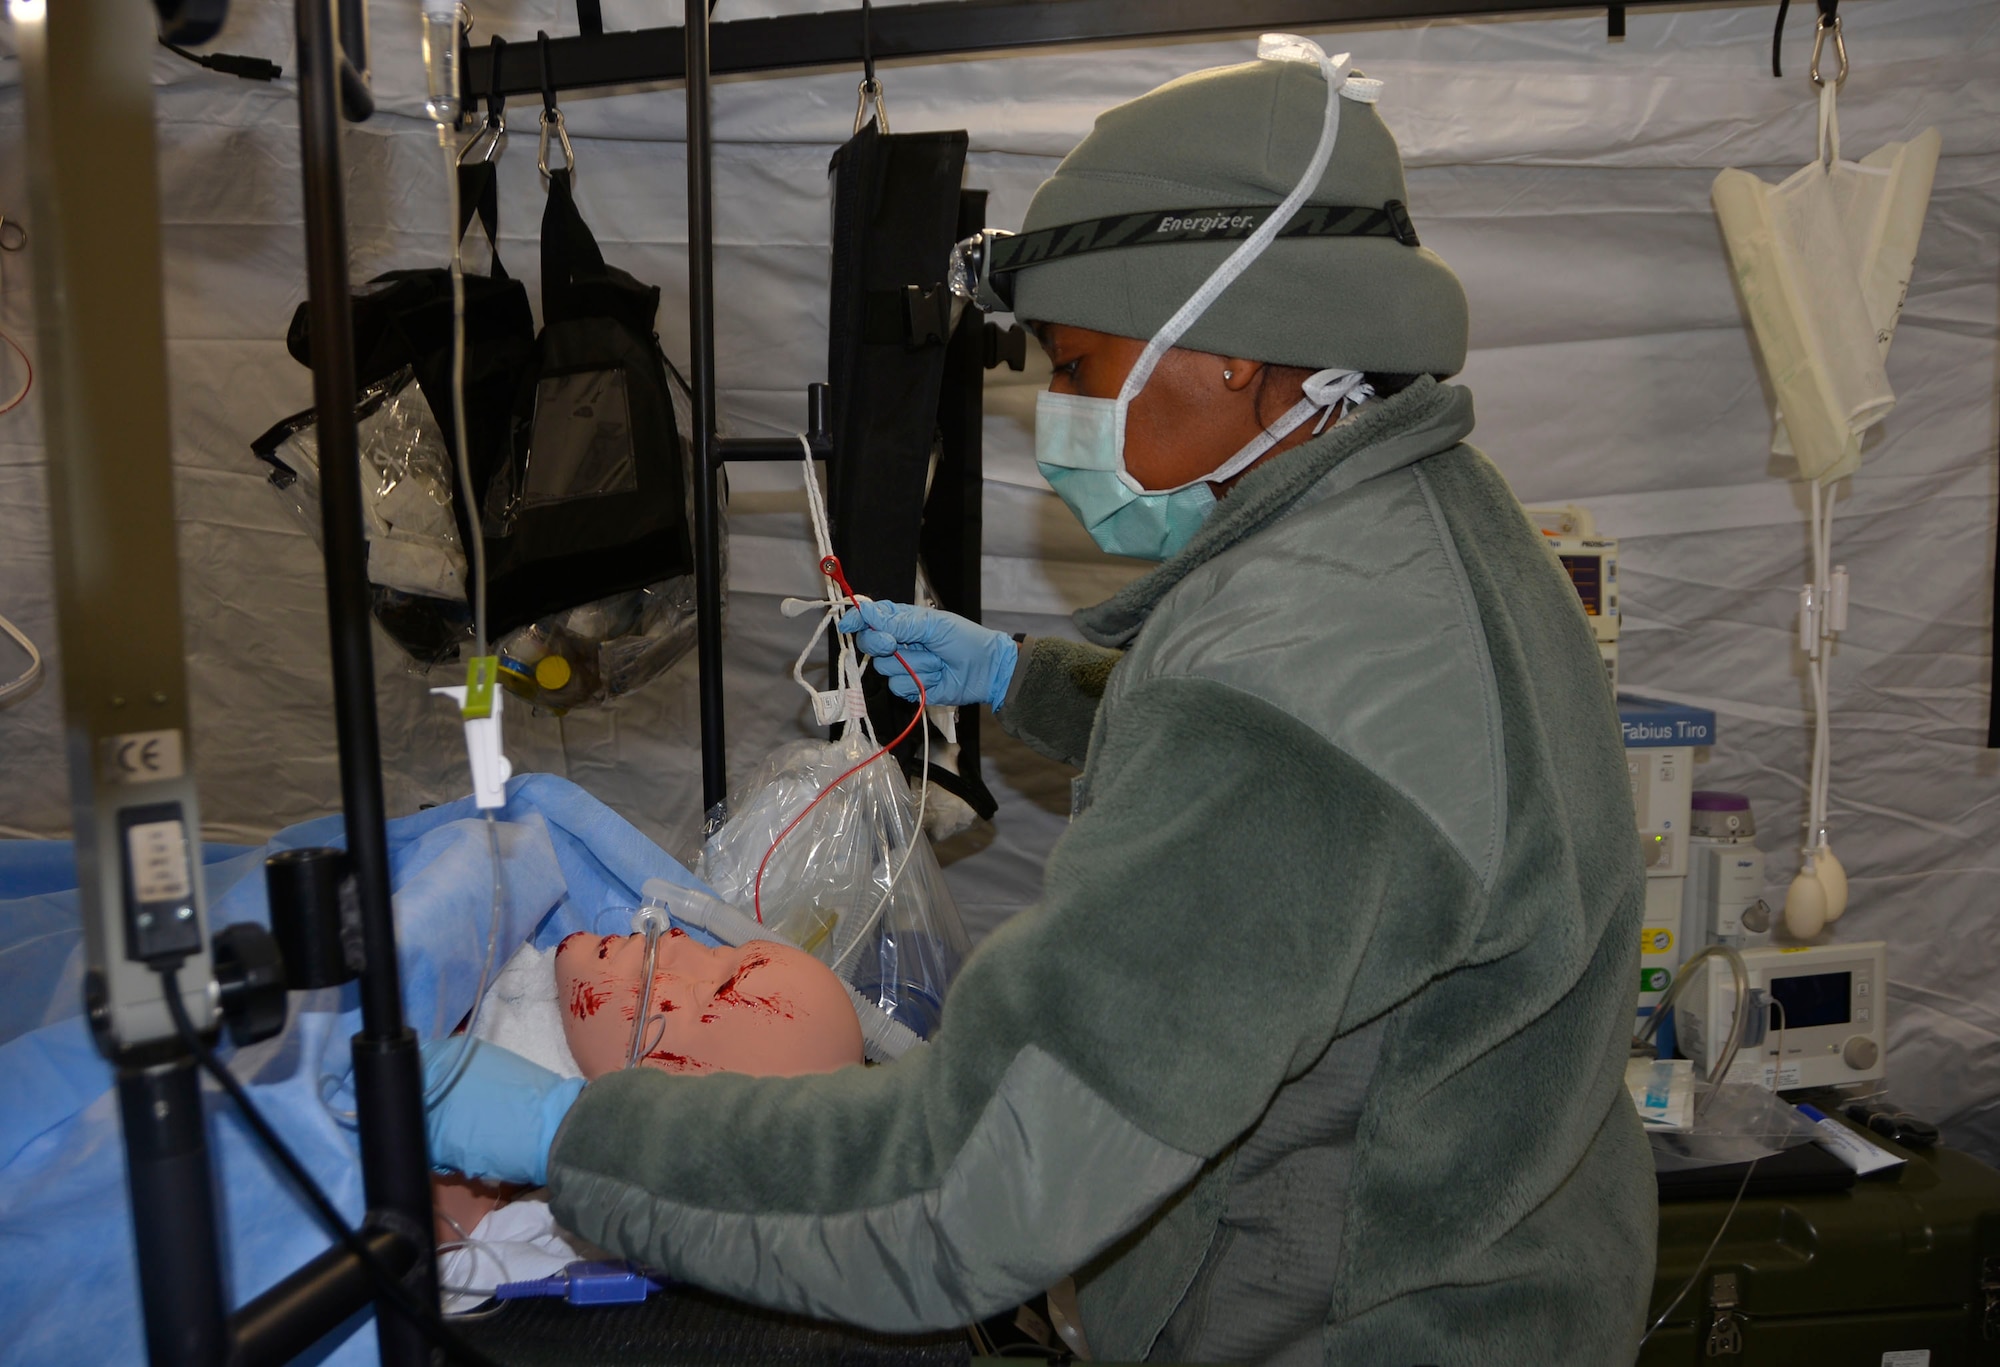 Maj. Stacy Carr, 81st Medical Group nurse anesthetist, prepares a simulated patient for surgery during the Expeditionary Medical Support field confirmation exercise at Camp Atterbury, Indiana, April 19, 2018. The confirmation exercise evaluated the tactics, techniques and procedures of EMEDS operations during a domestic U.S. contingency such as a natural disaster. (U.S. Air Force photo by Mary McHale)